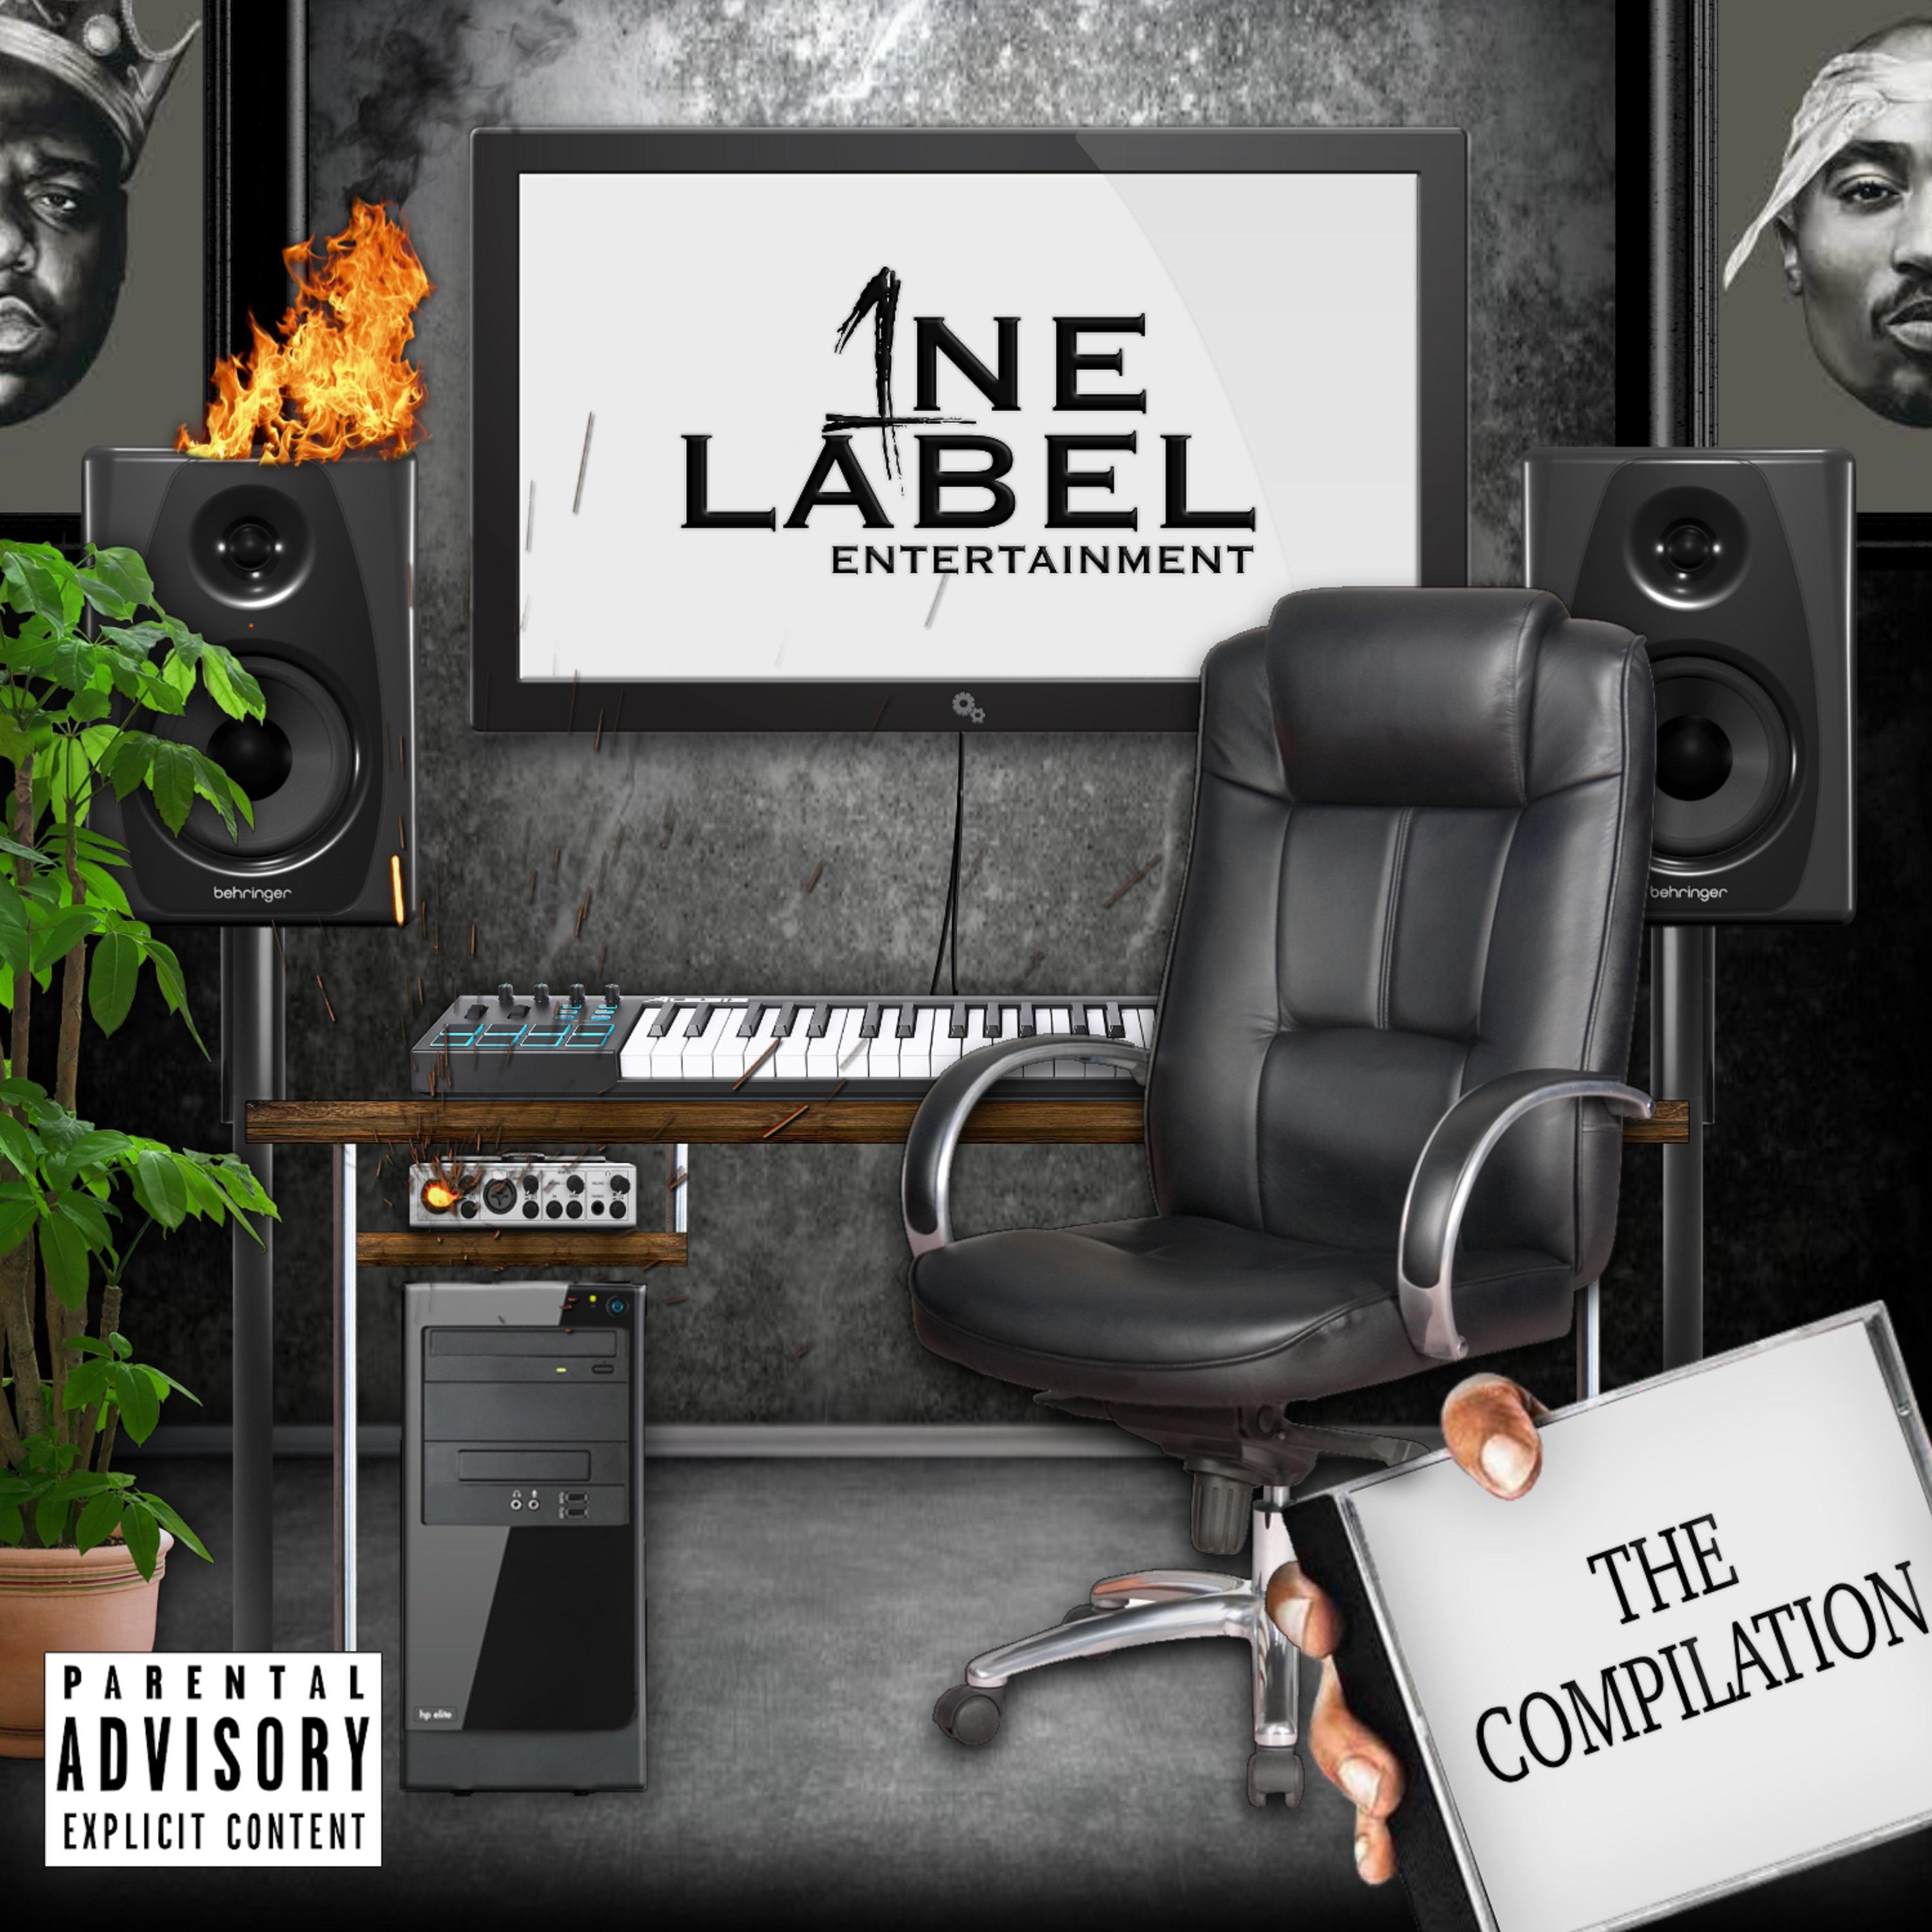 One Label Entertainment: The Compilation